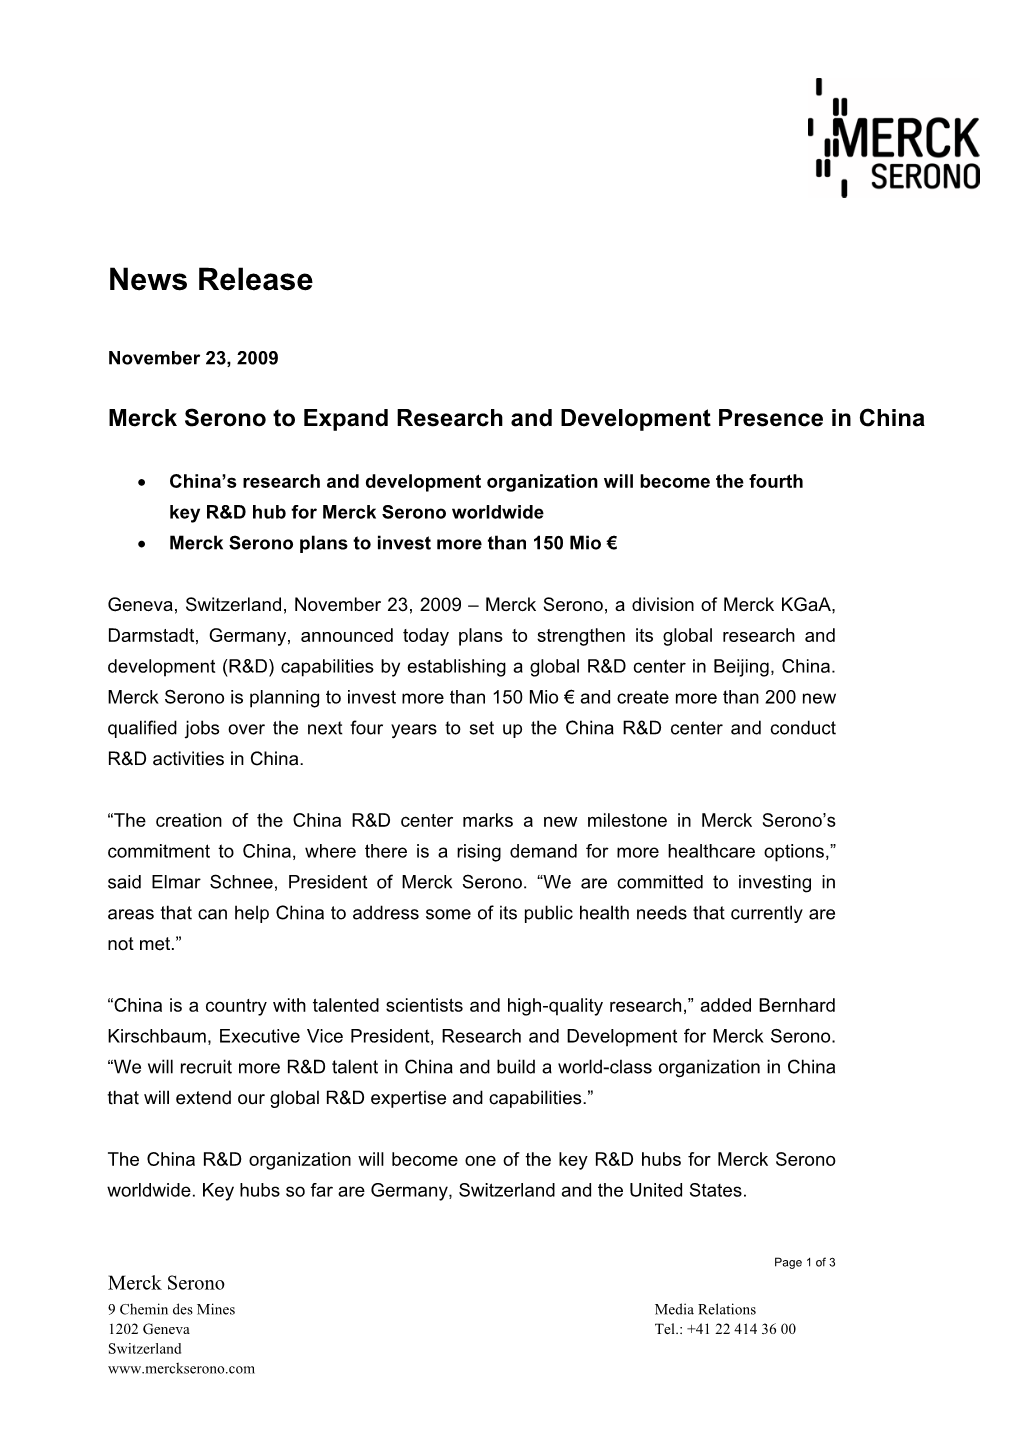 Merck Serono to Expand Research and Development Presence in China